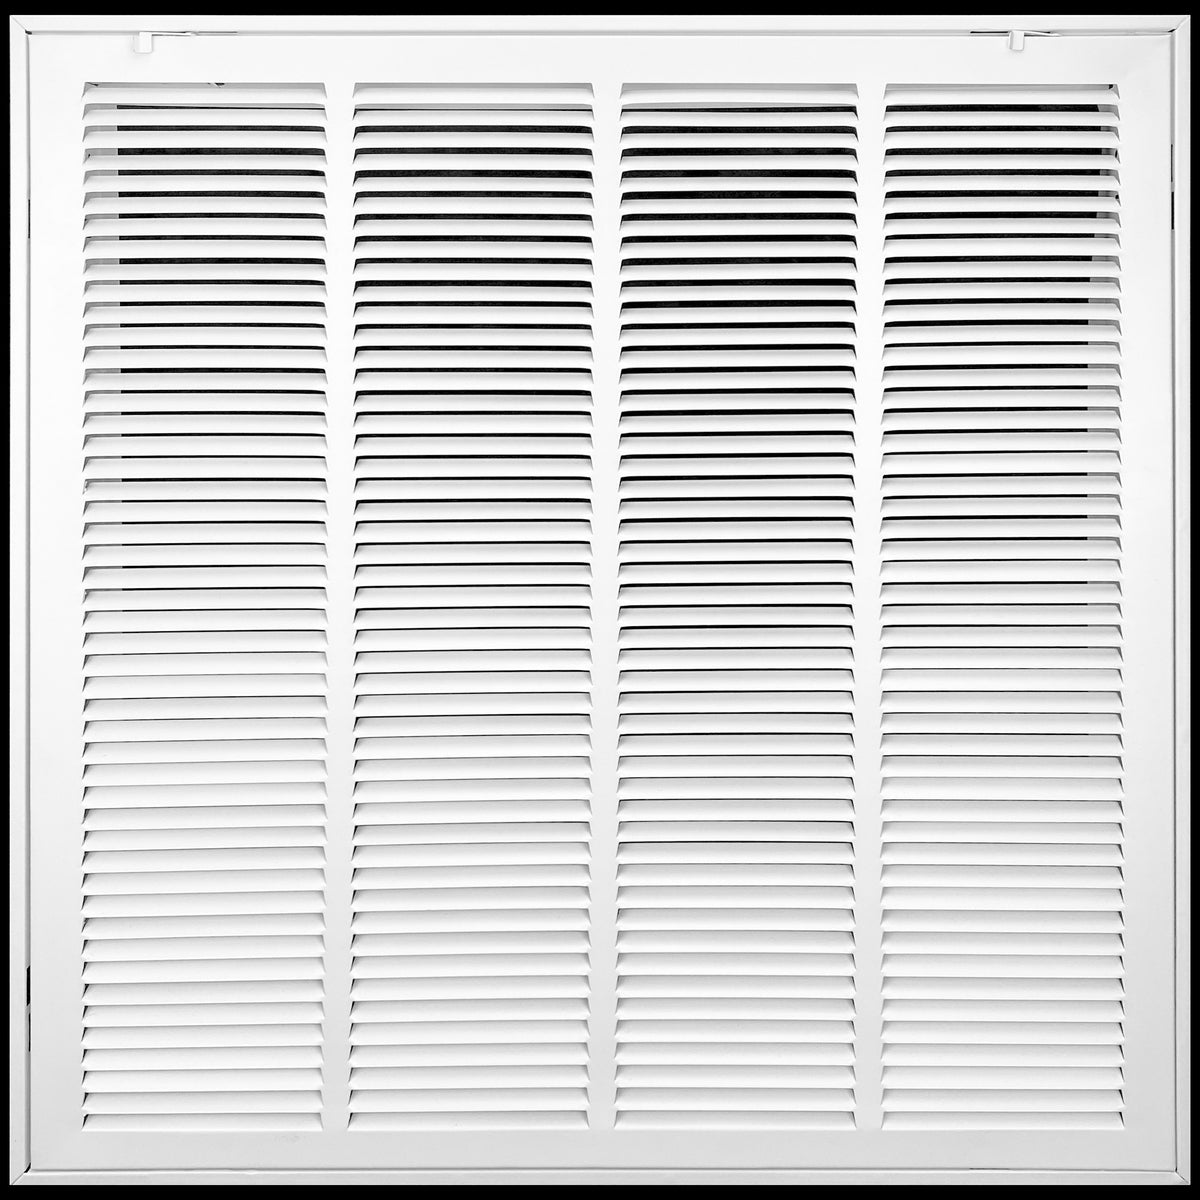 airgrilles 30" x 20" duct opening hd steel return air filter grille for sidewall and ceilingagc7agc-1raf-wh-30x20 756014649512 1